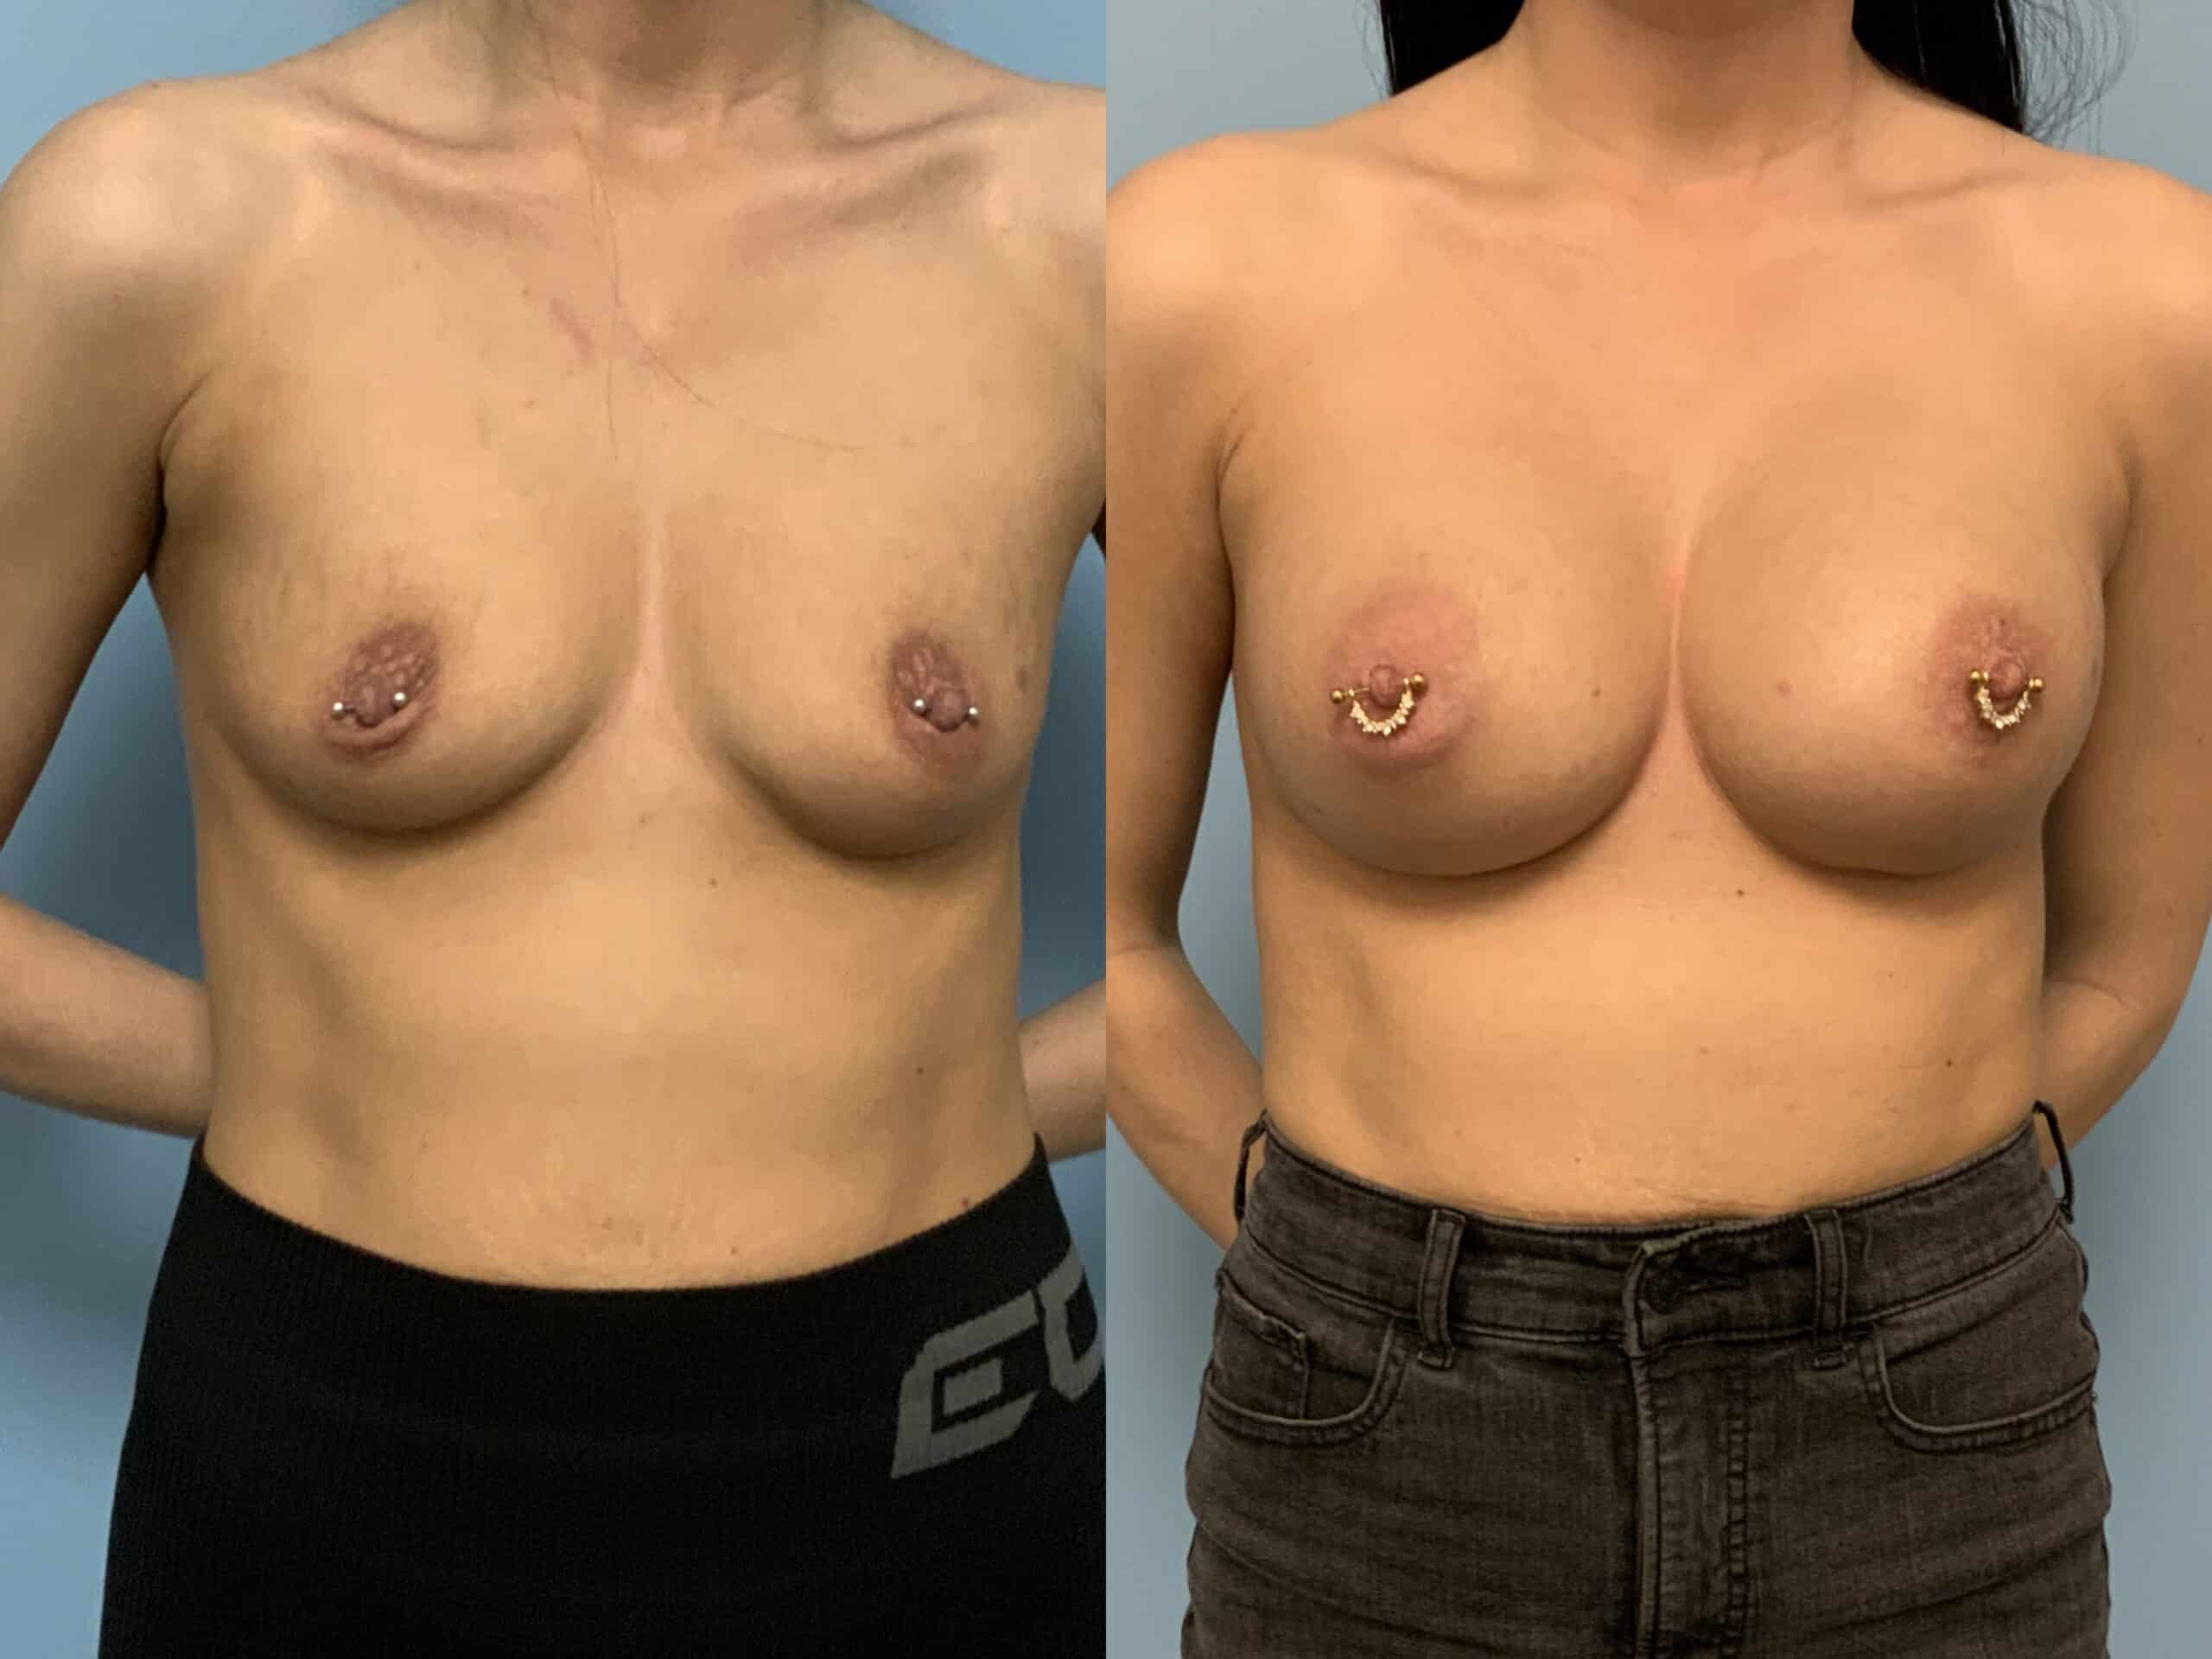 Before and after of patient 6 mo post op from Breast Augmentation, Level III Muscle Release performed by Dr. Paul Vanek